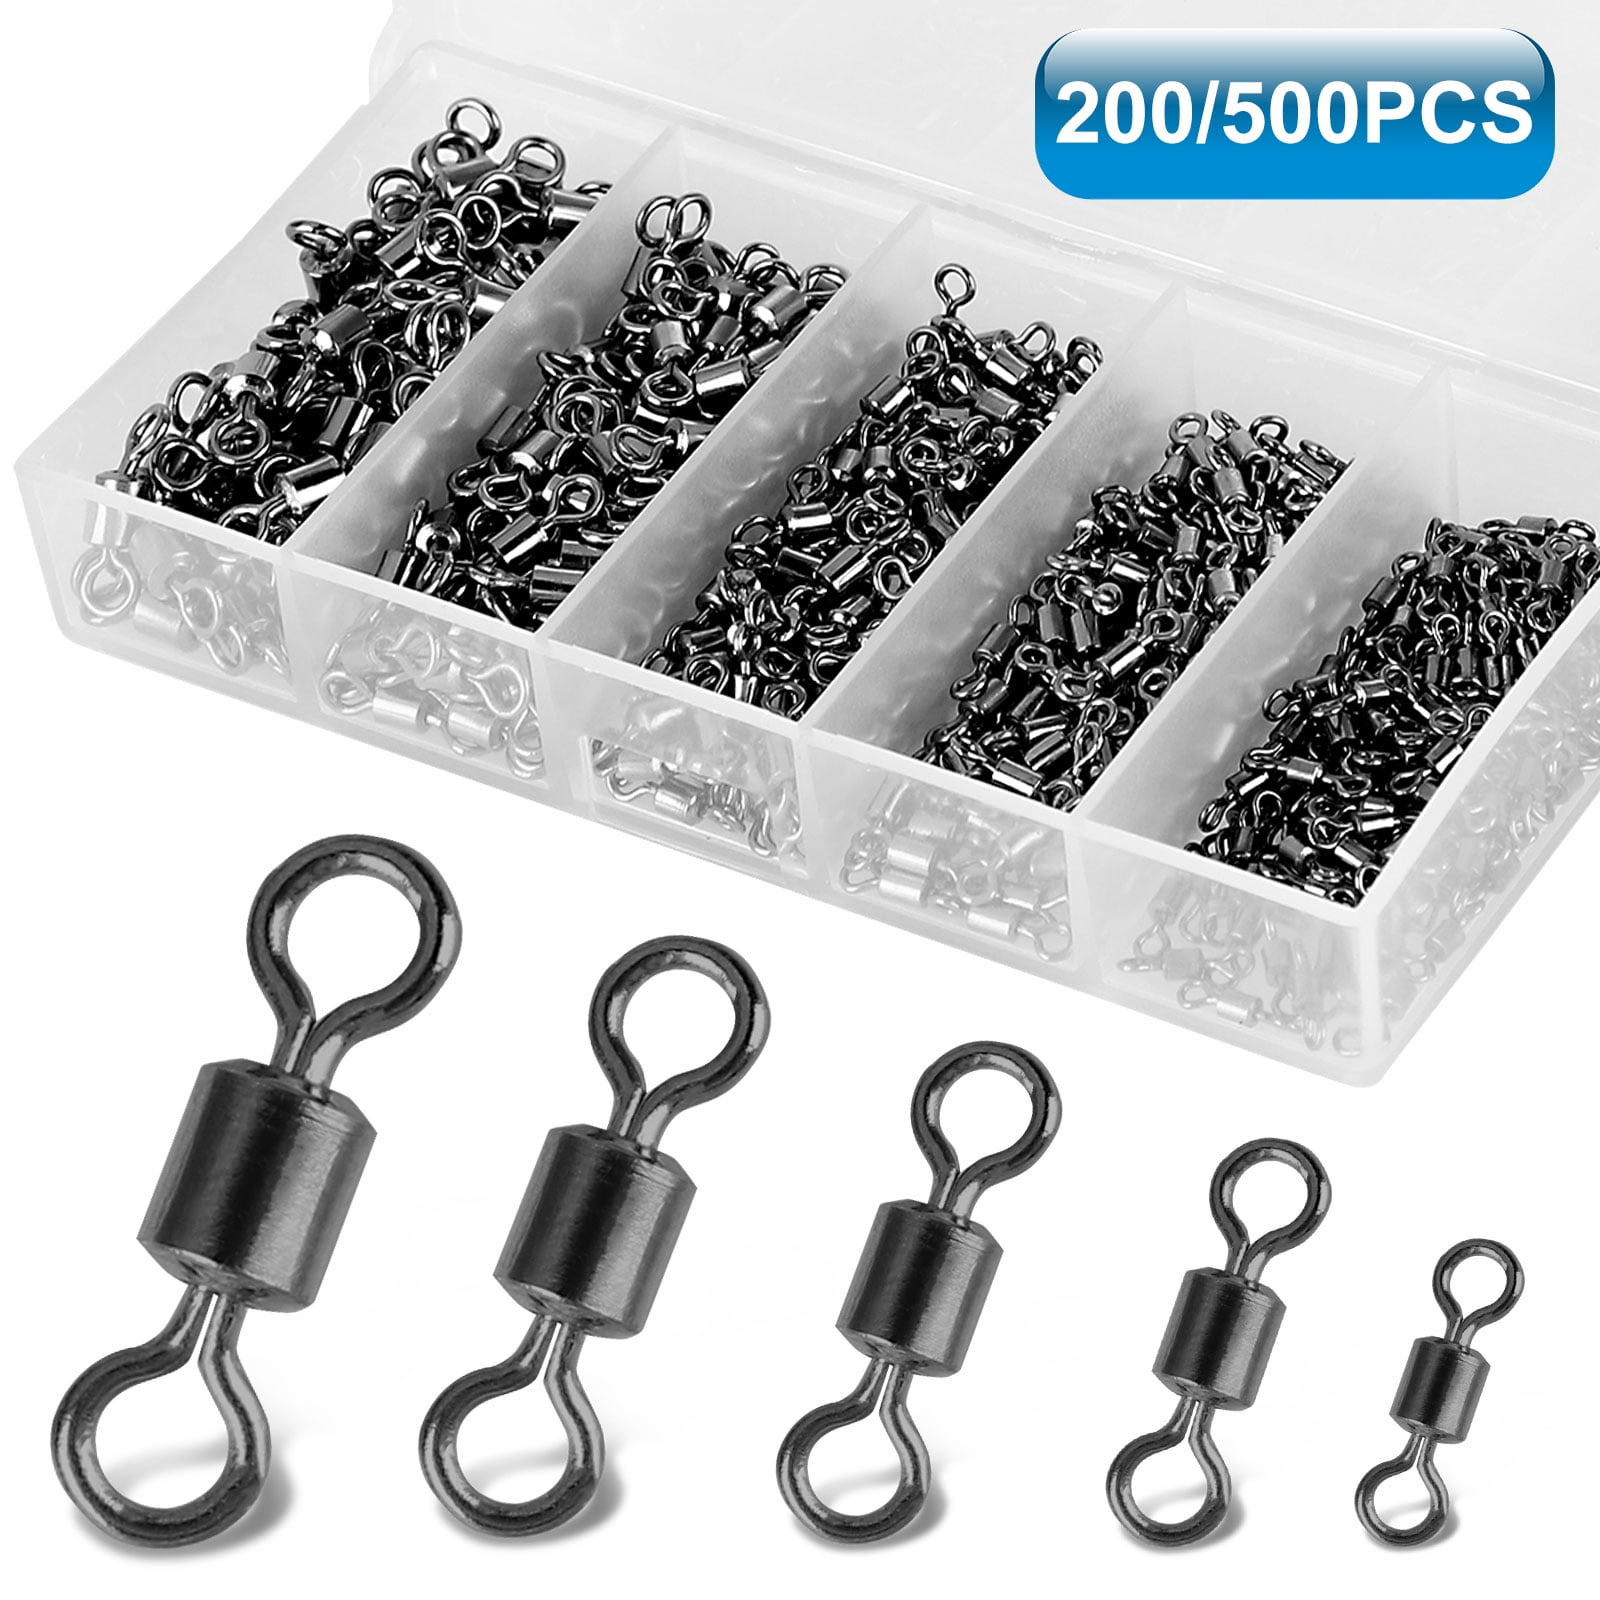 Akstore 100pcs Fish Rolling Ball Bearing Barrel Swivel with Safty Snap Connector